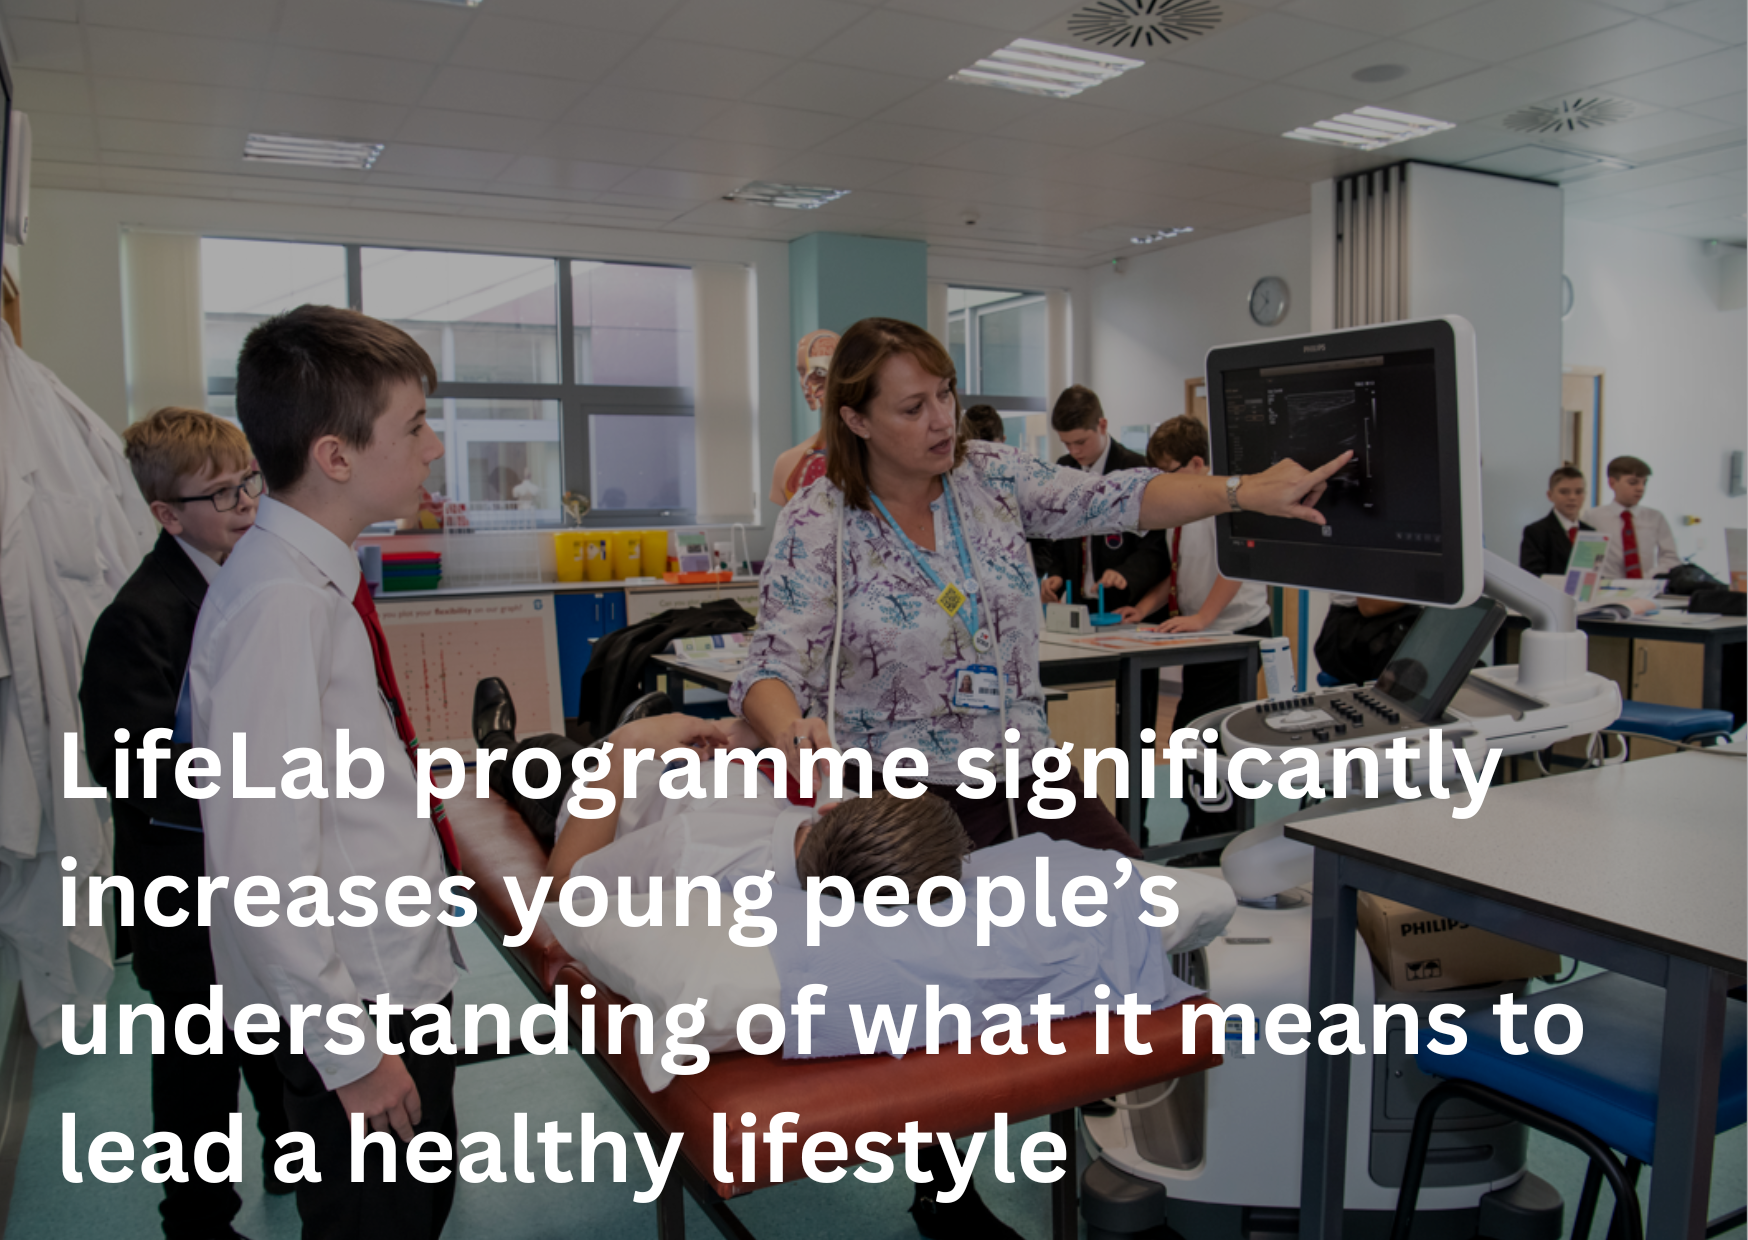 LifeLab programme  significantly increases young people's understanding of what it means to lead a healthy lifestyle